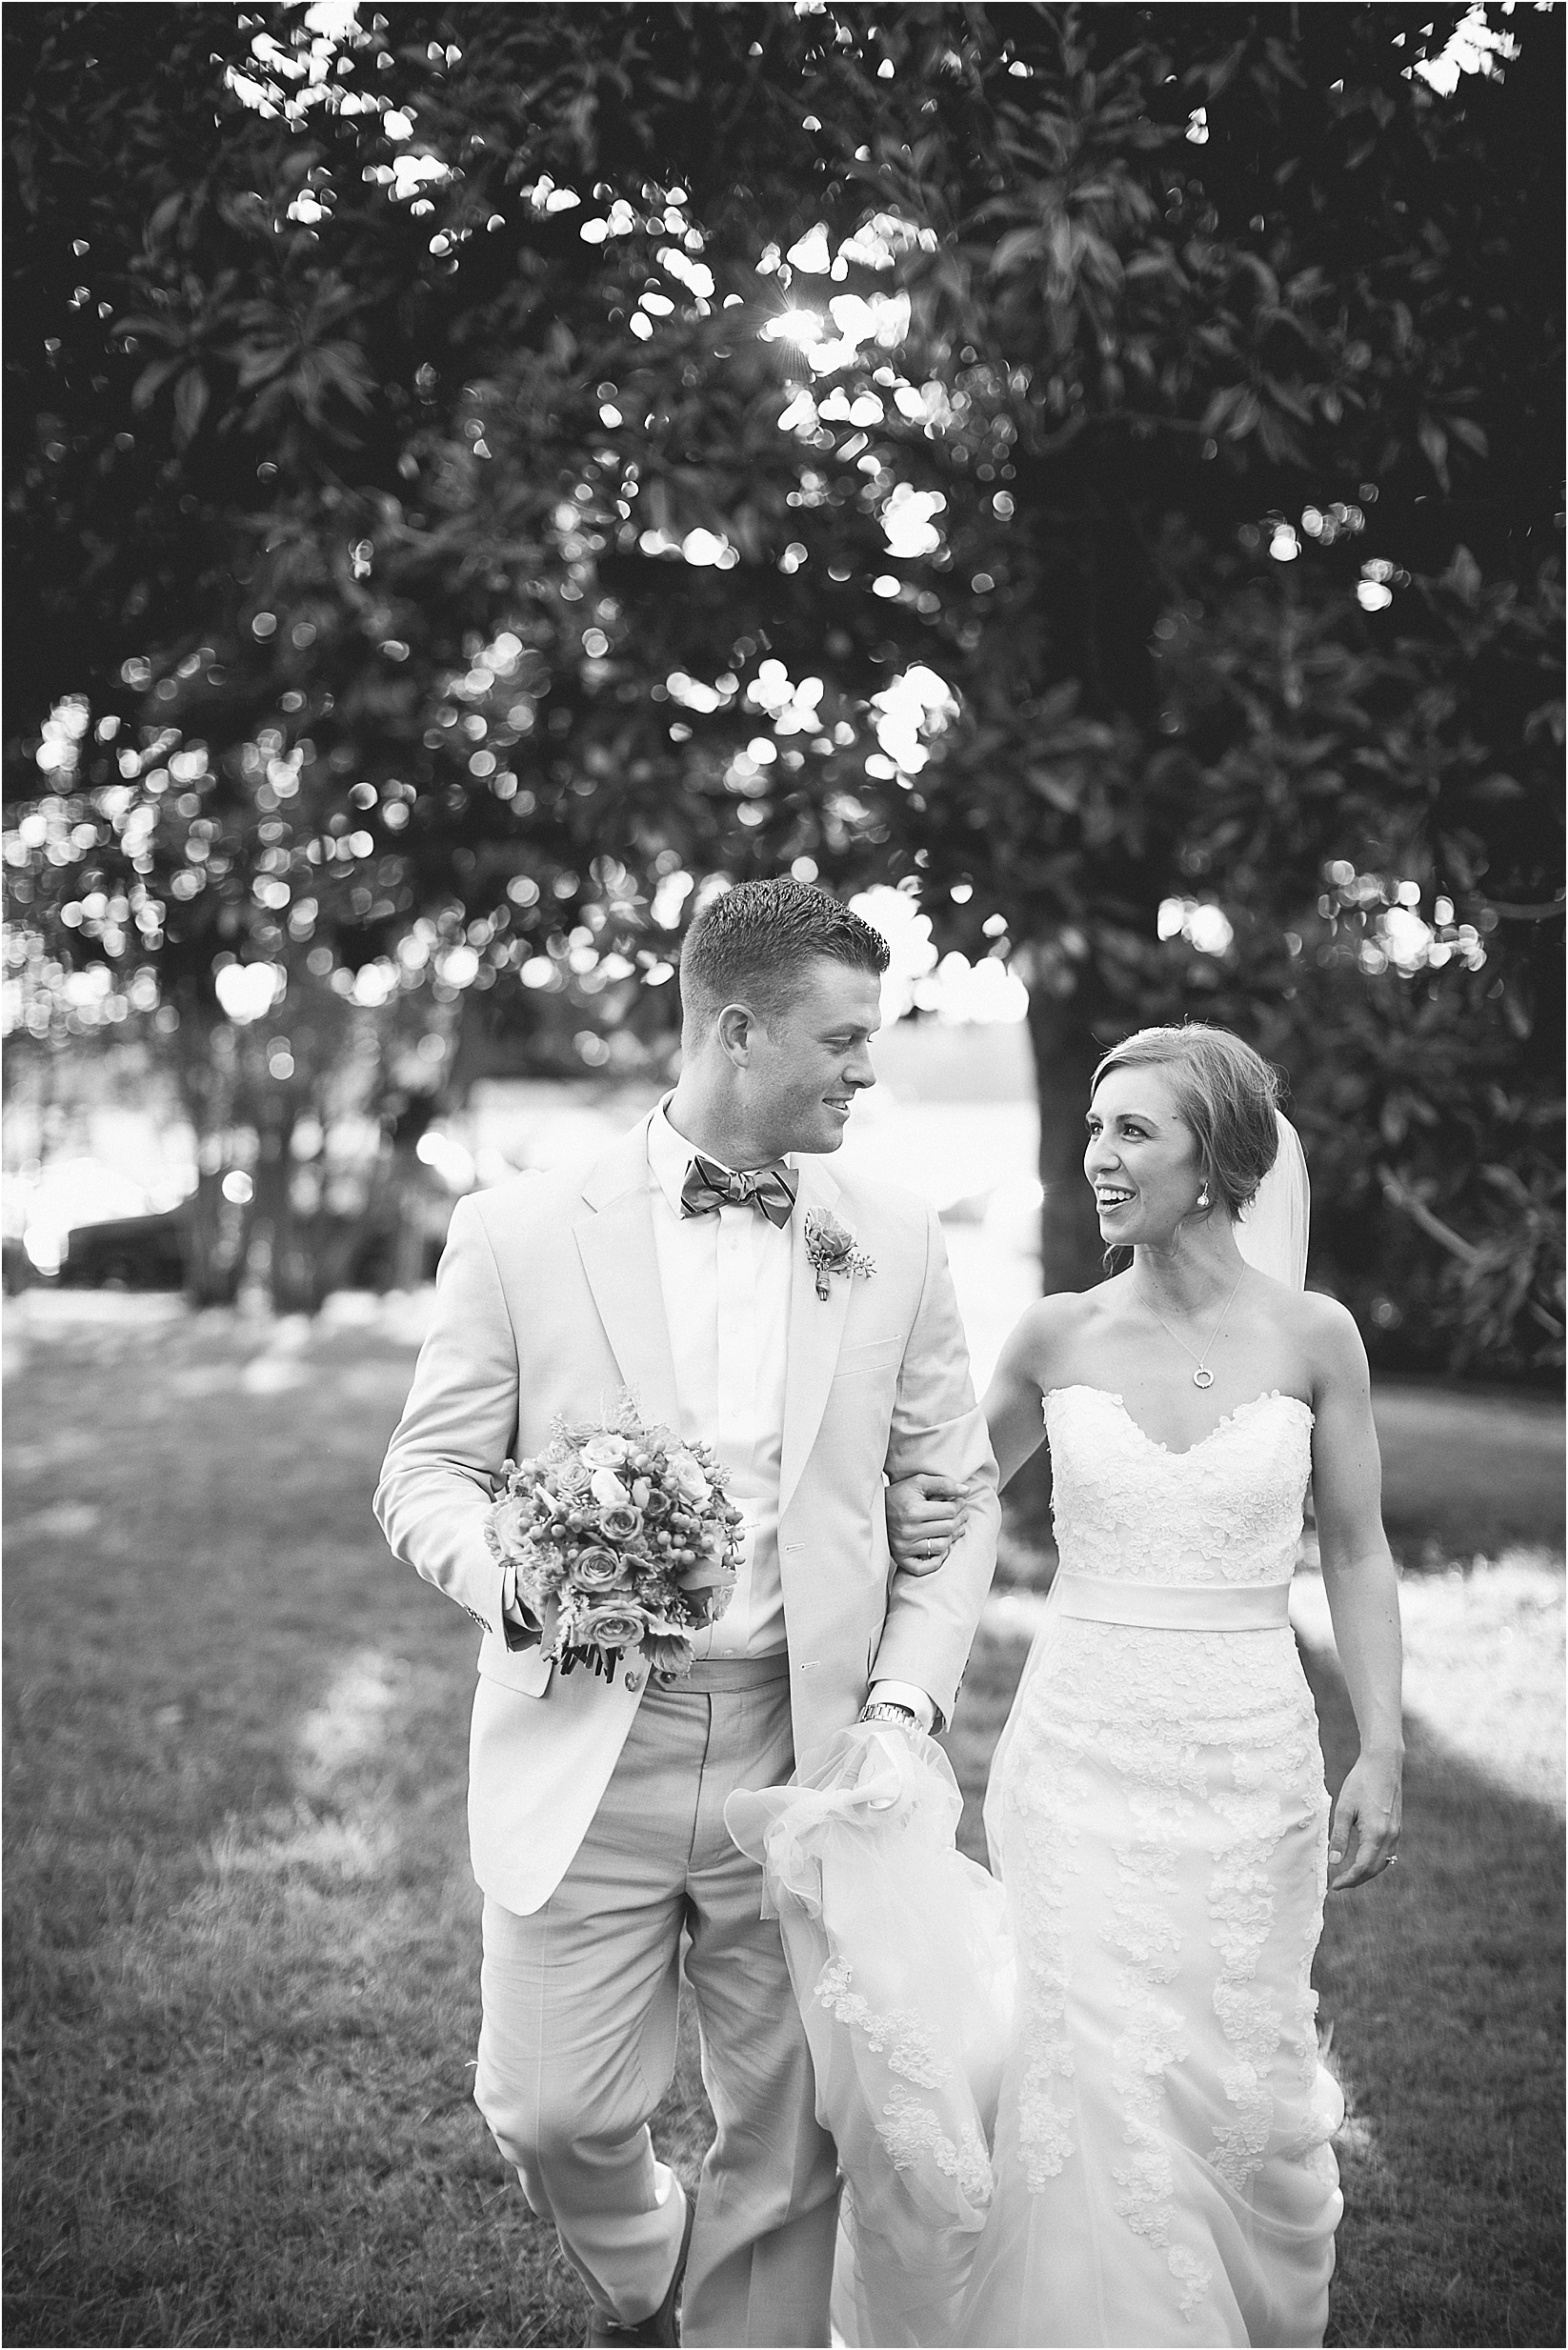 taking a walk during their wedding at the Historic Rural Hill wedding ceremony and reception in Huntersville nc